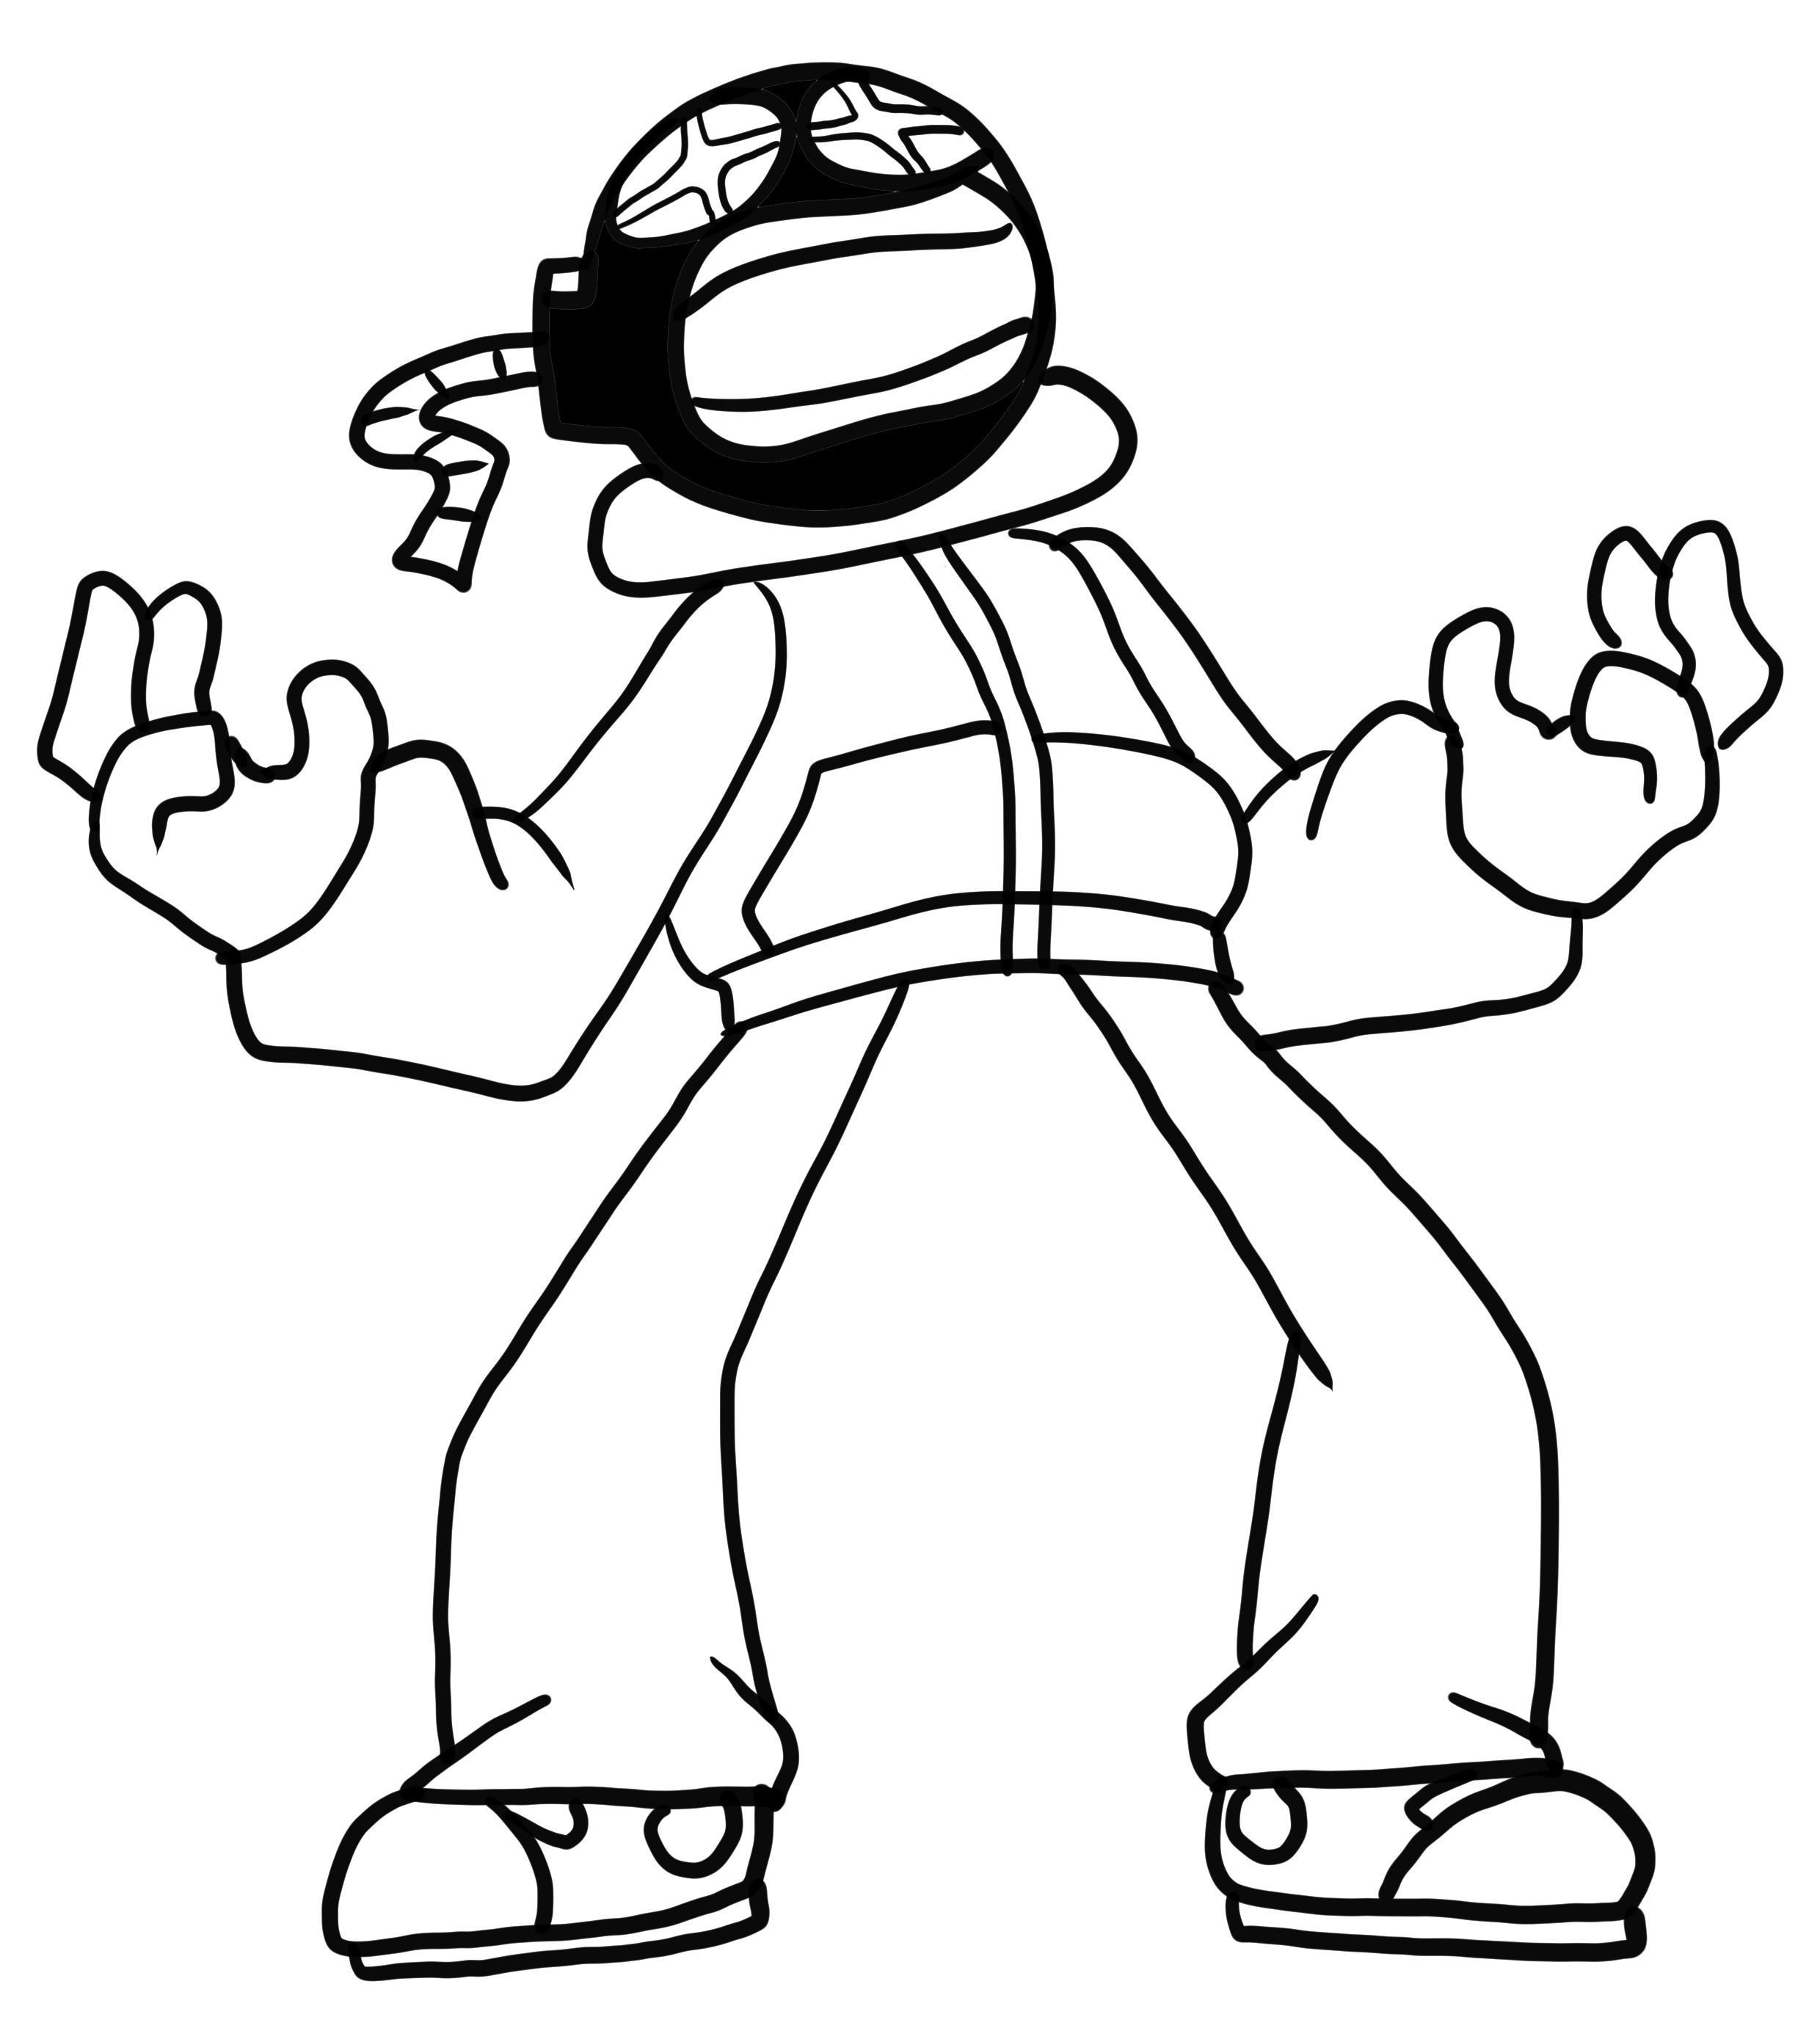 Whitty from Friday Night Funkin coloring page